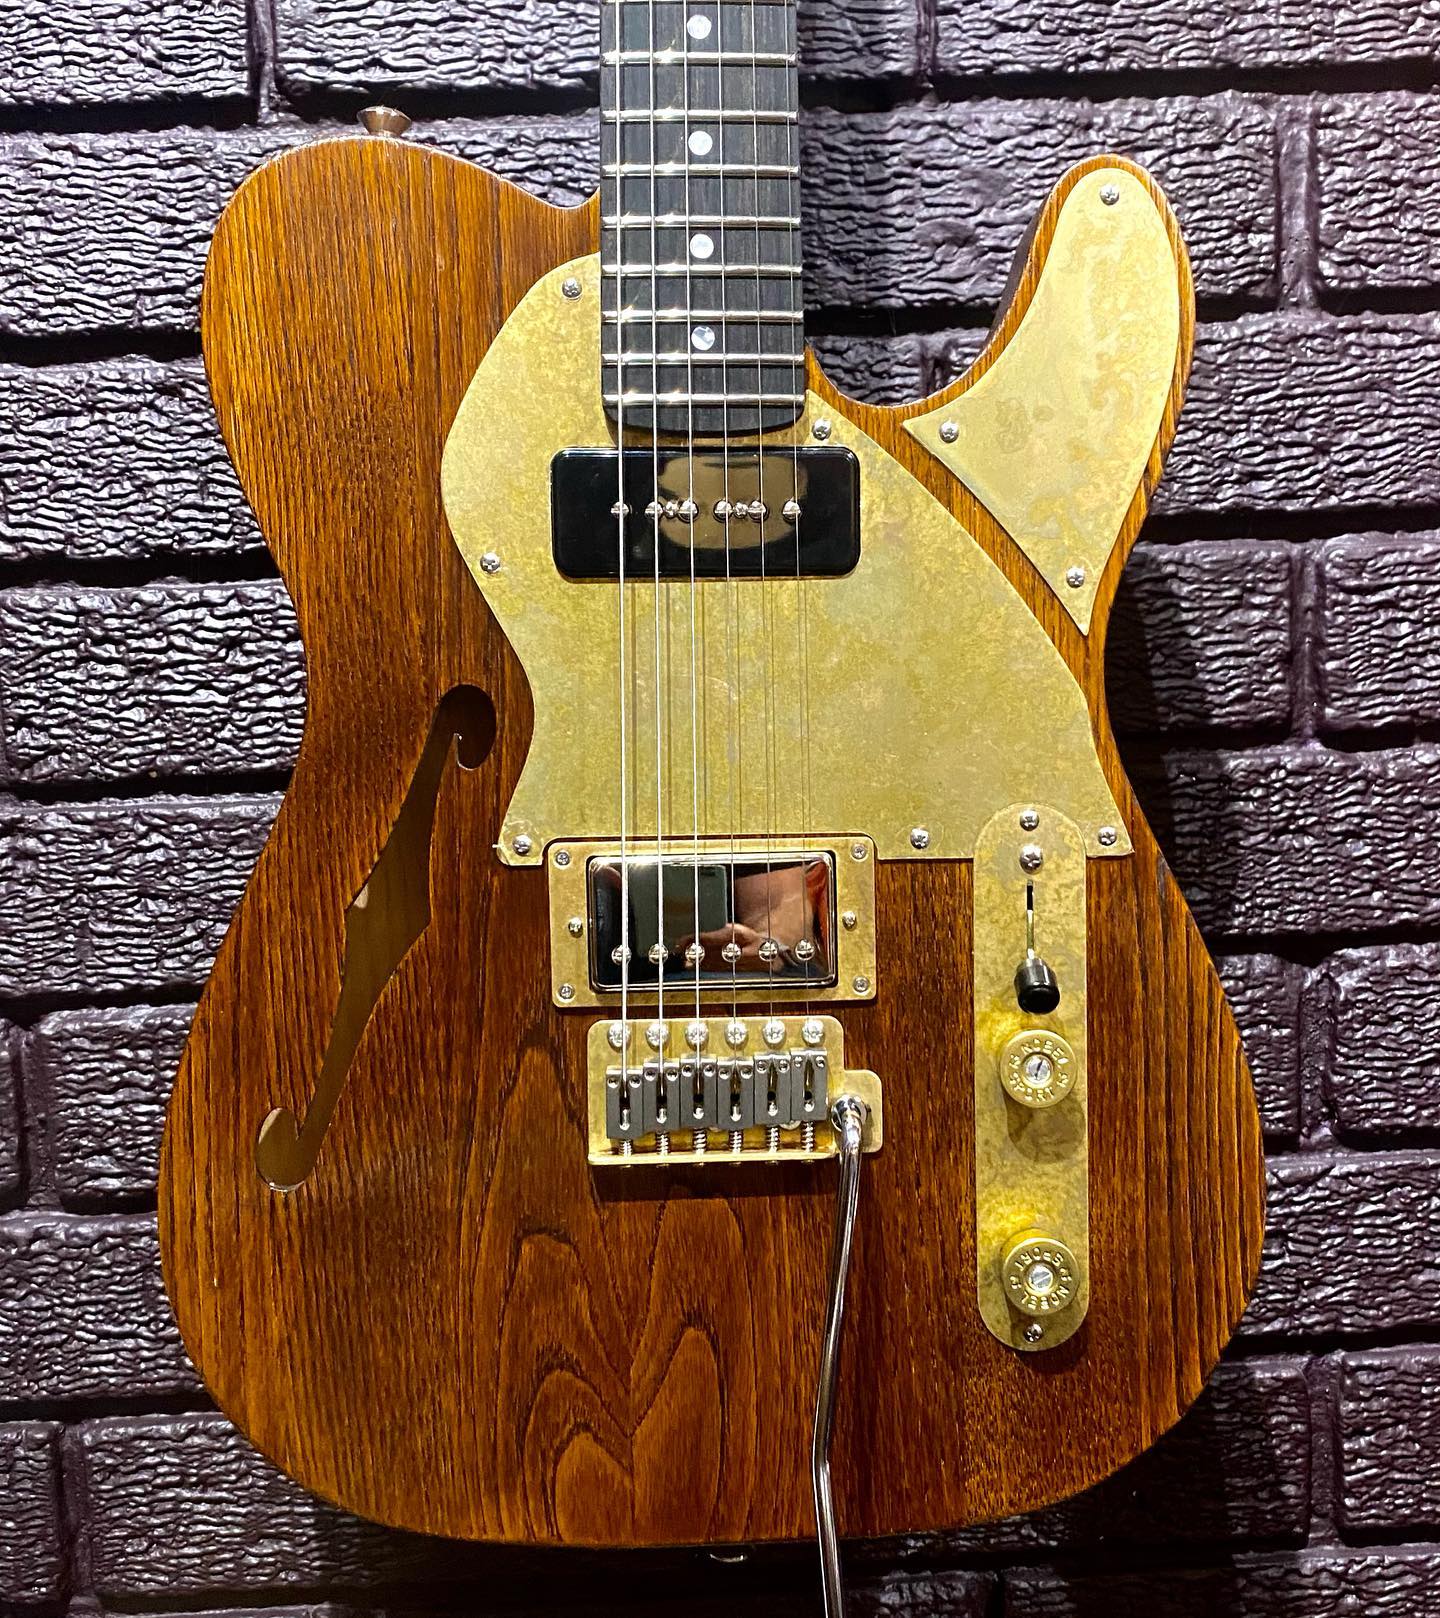 Paoetti Guitars Are IN STOCK!